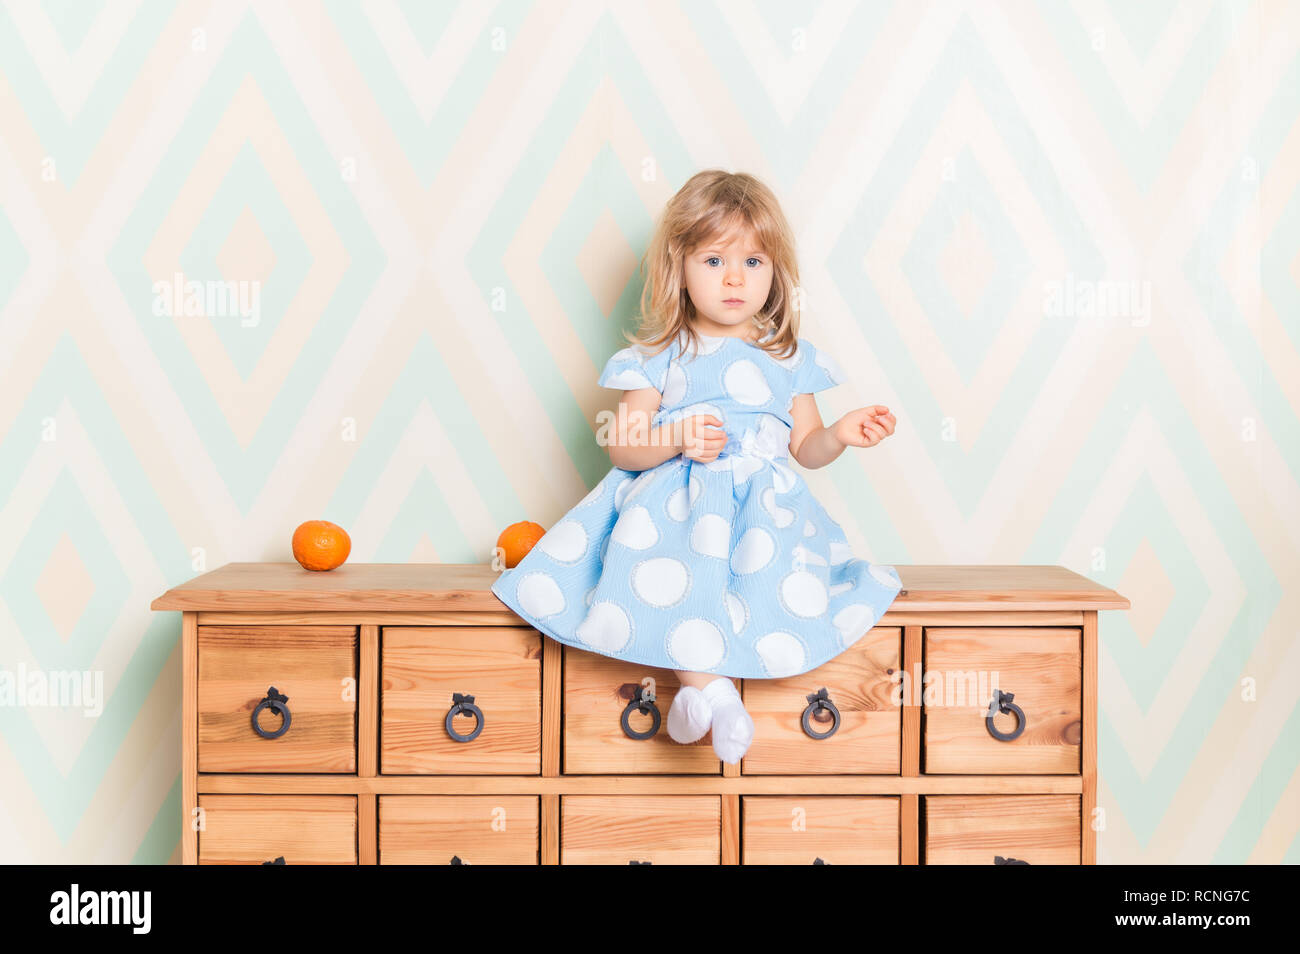 A little baby girl in her room sitting cross-legged on chest of drawers with tangerines on the rhomb wallpaper background. Child in blue polka dot dress and white socks attentively looking at camera Stock Photo